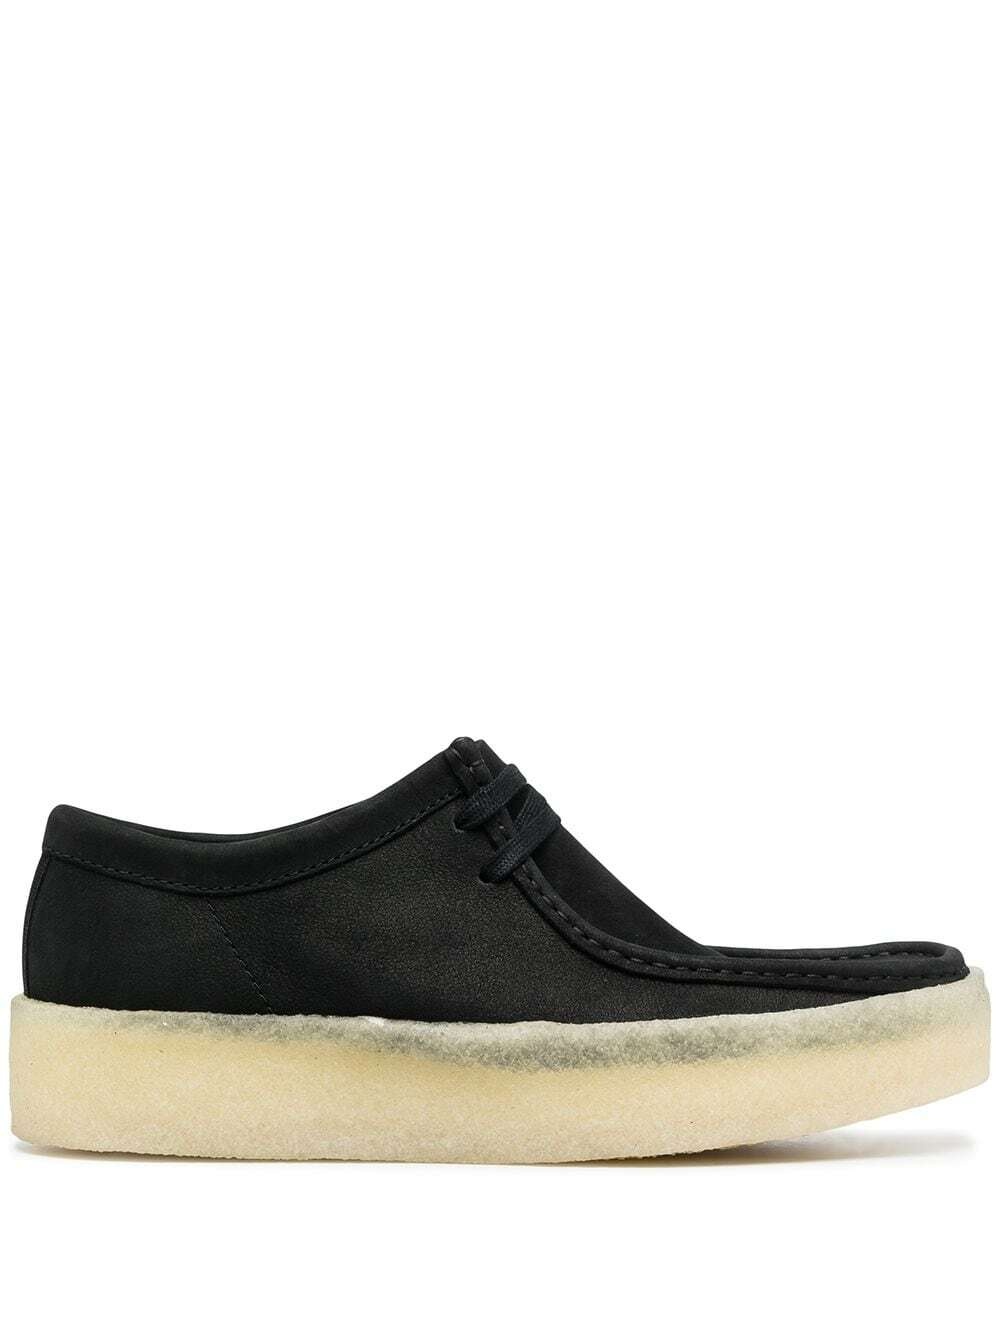 CLARKS - Wallabee Cup Leather Brogues Clarks Originals